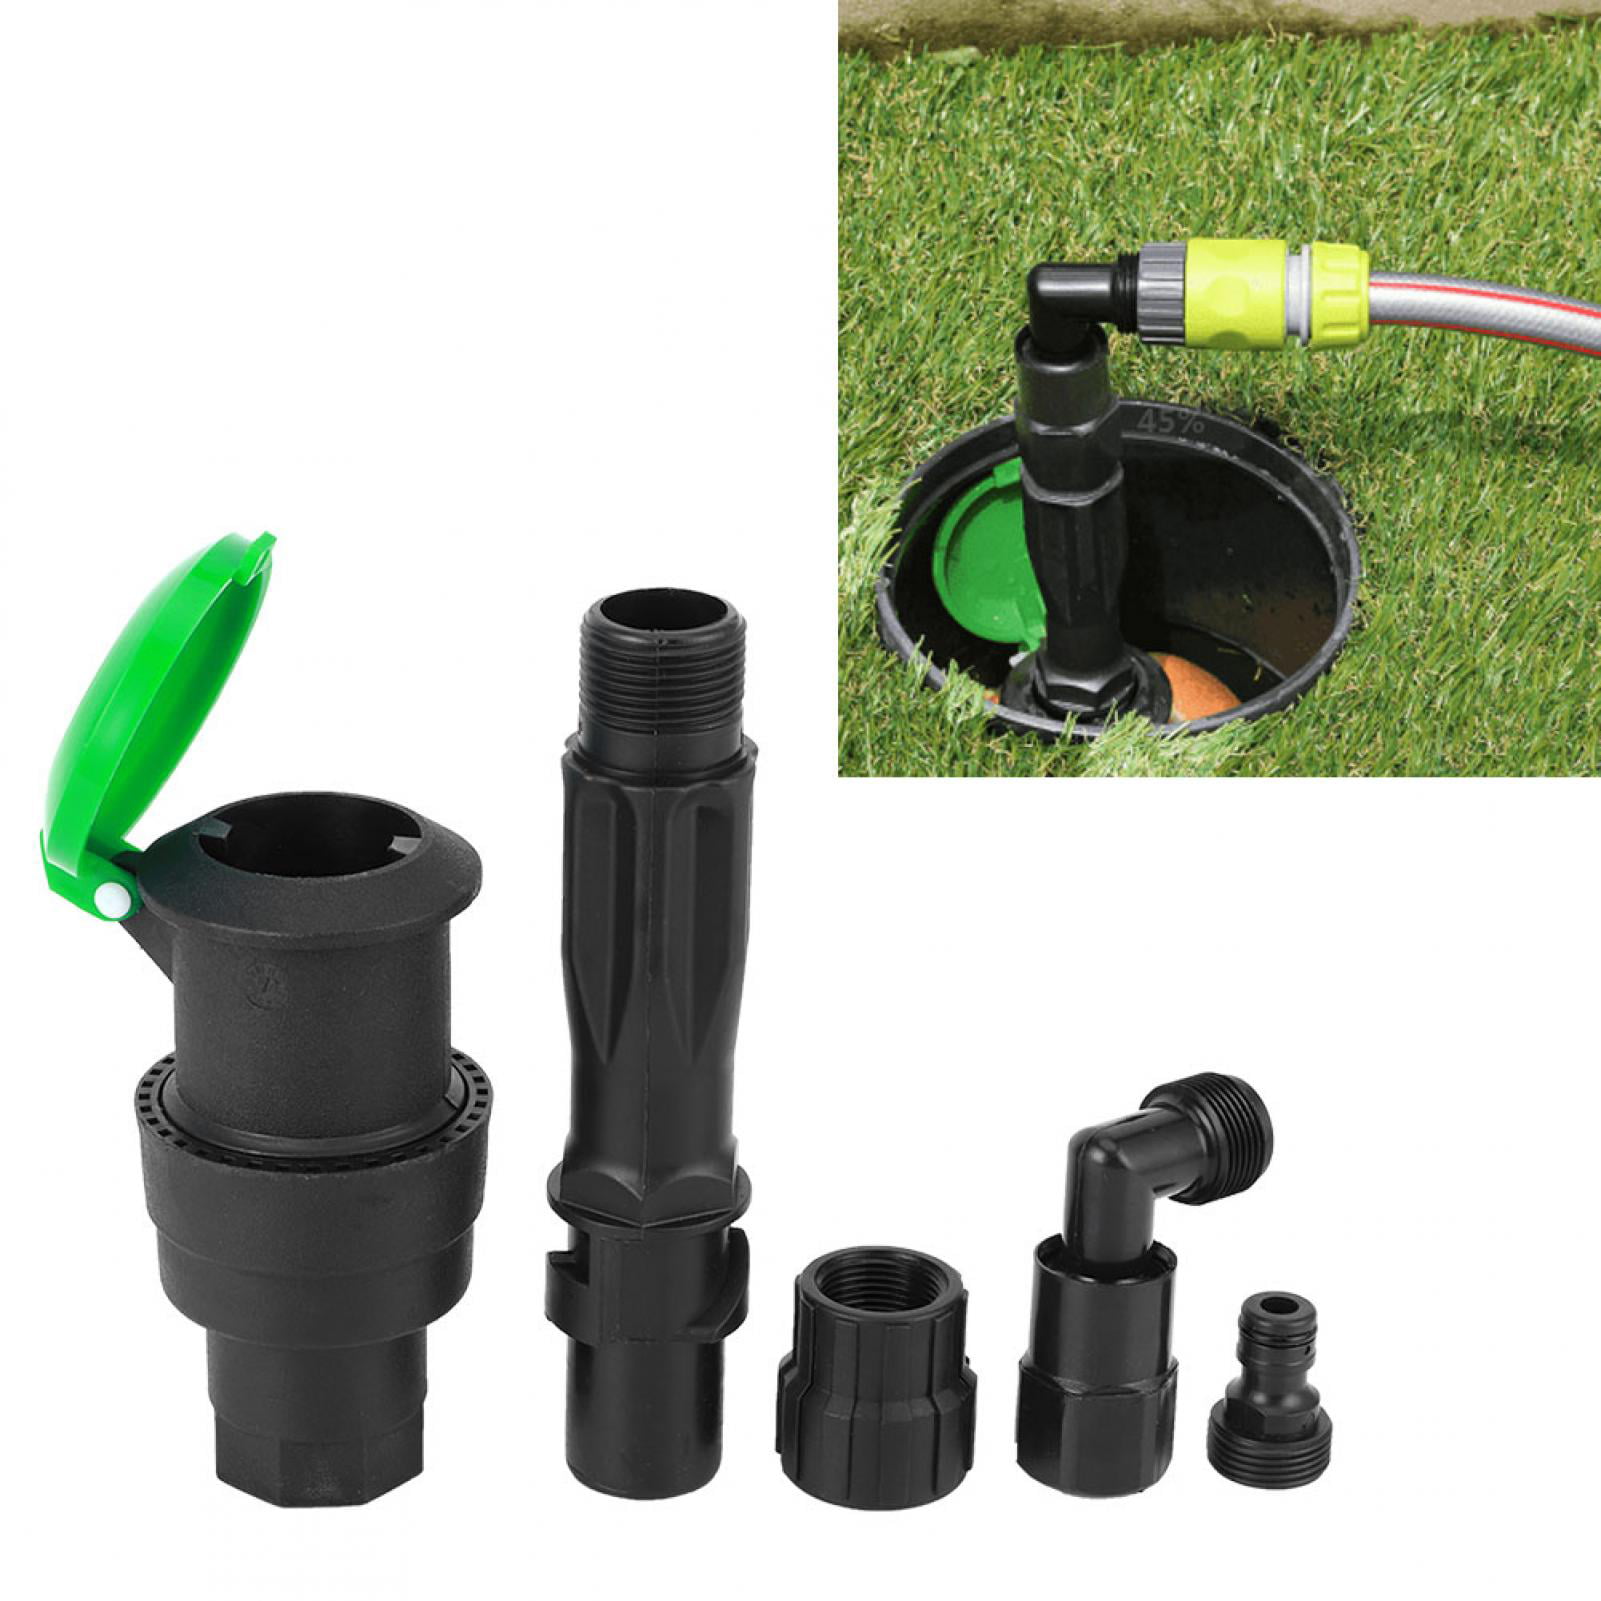 Female Thread PVC Pipe Ball Valve Garden Water Connectors Irrigation Pipe Joint